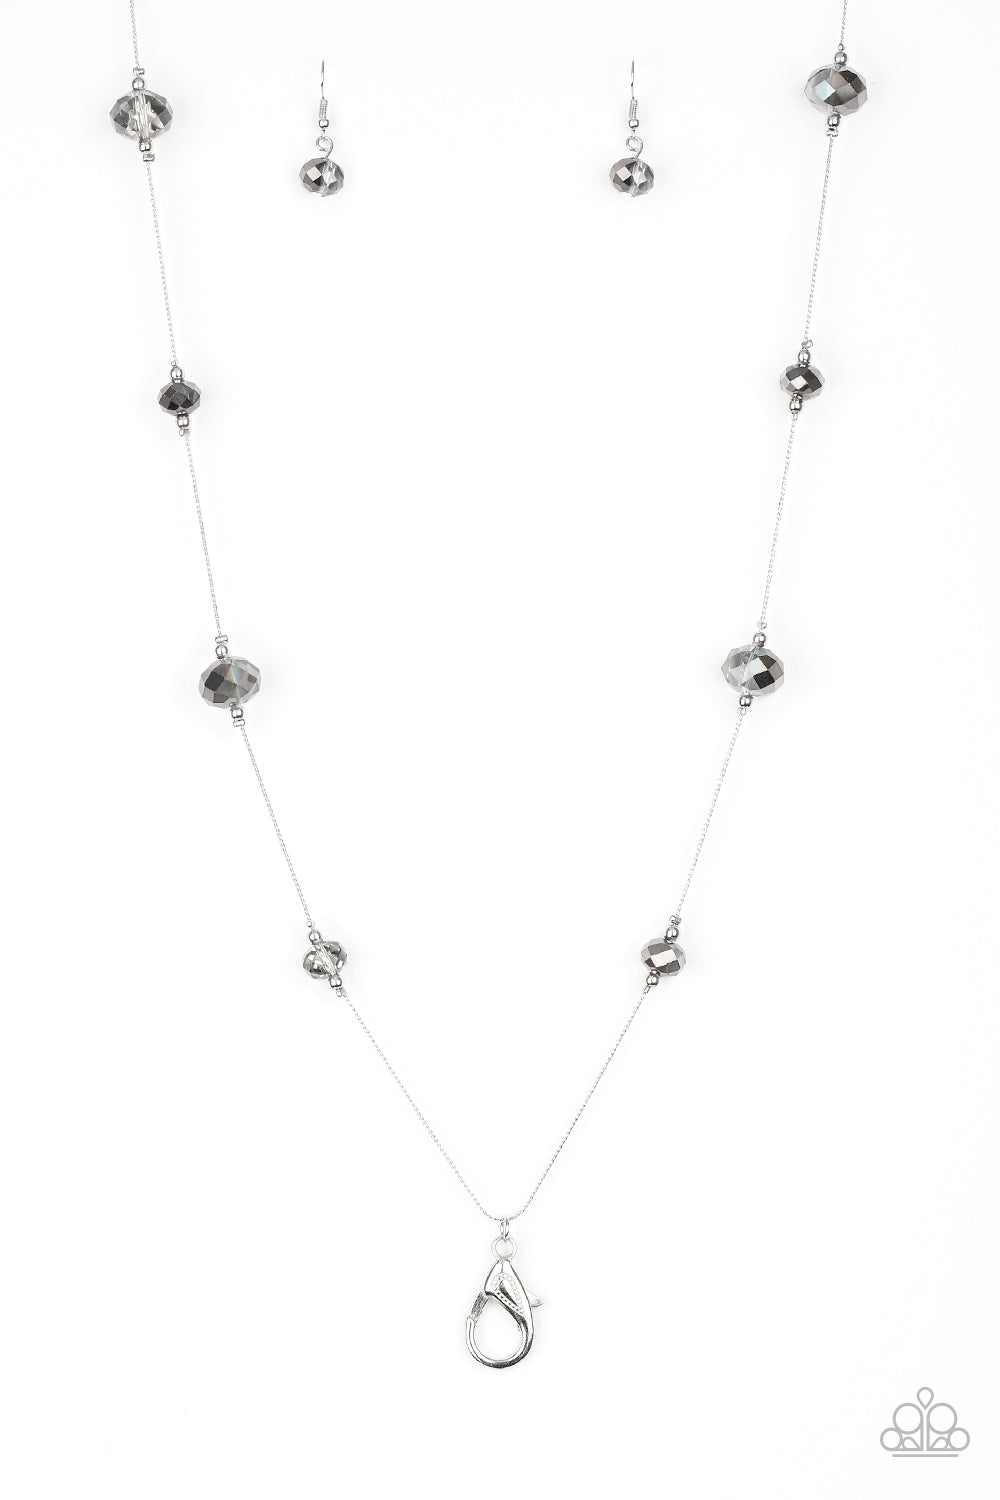 Champagne On The Rocks - Silver Lanyard Necklace Set